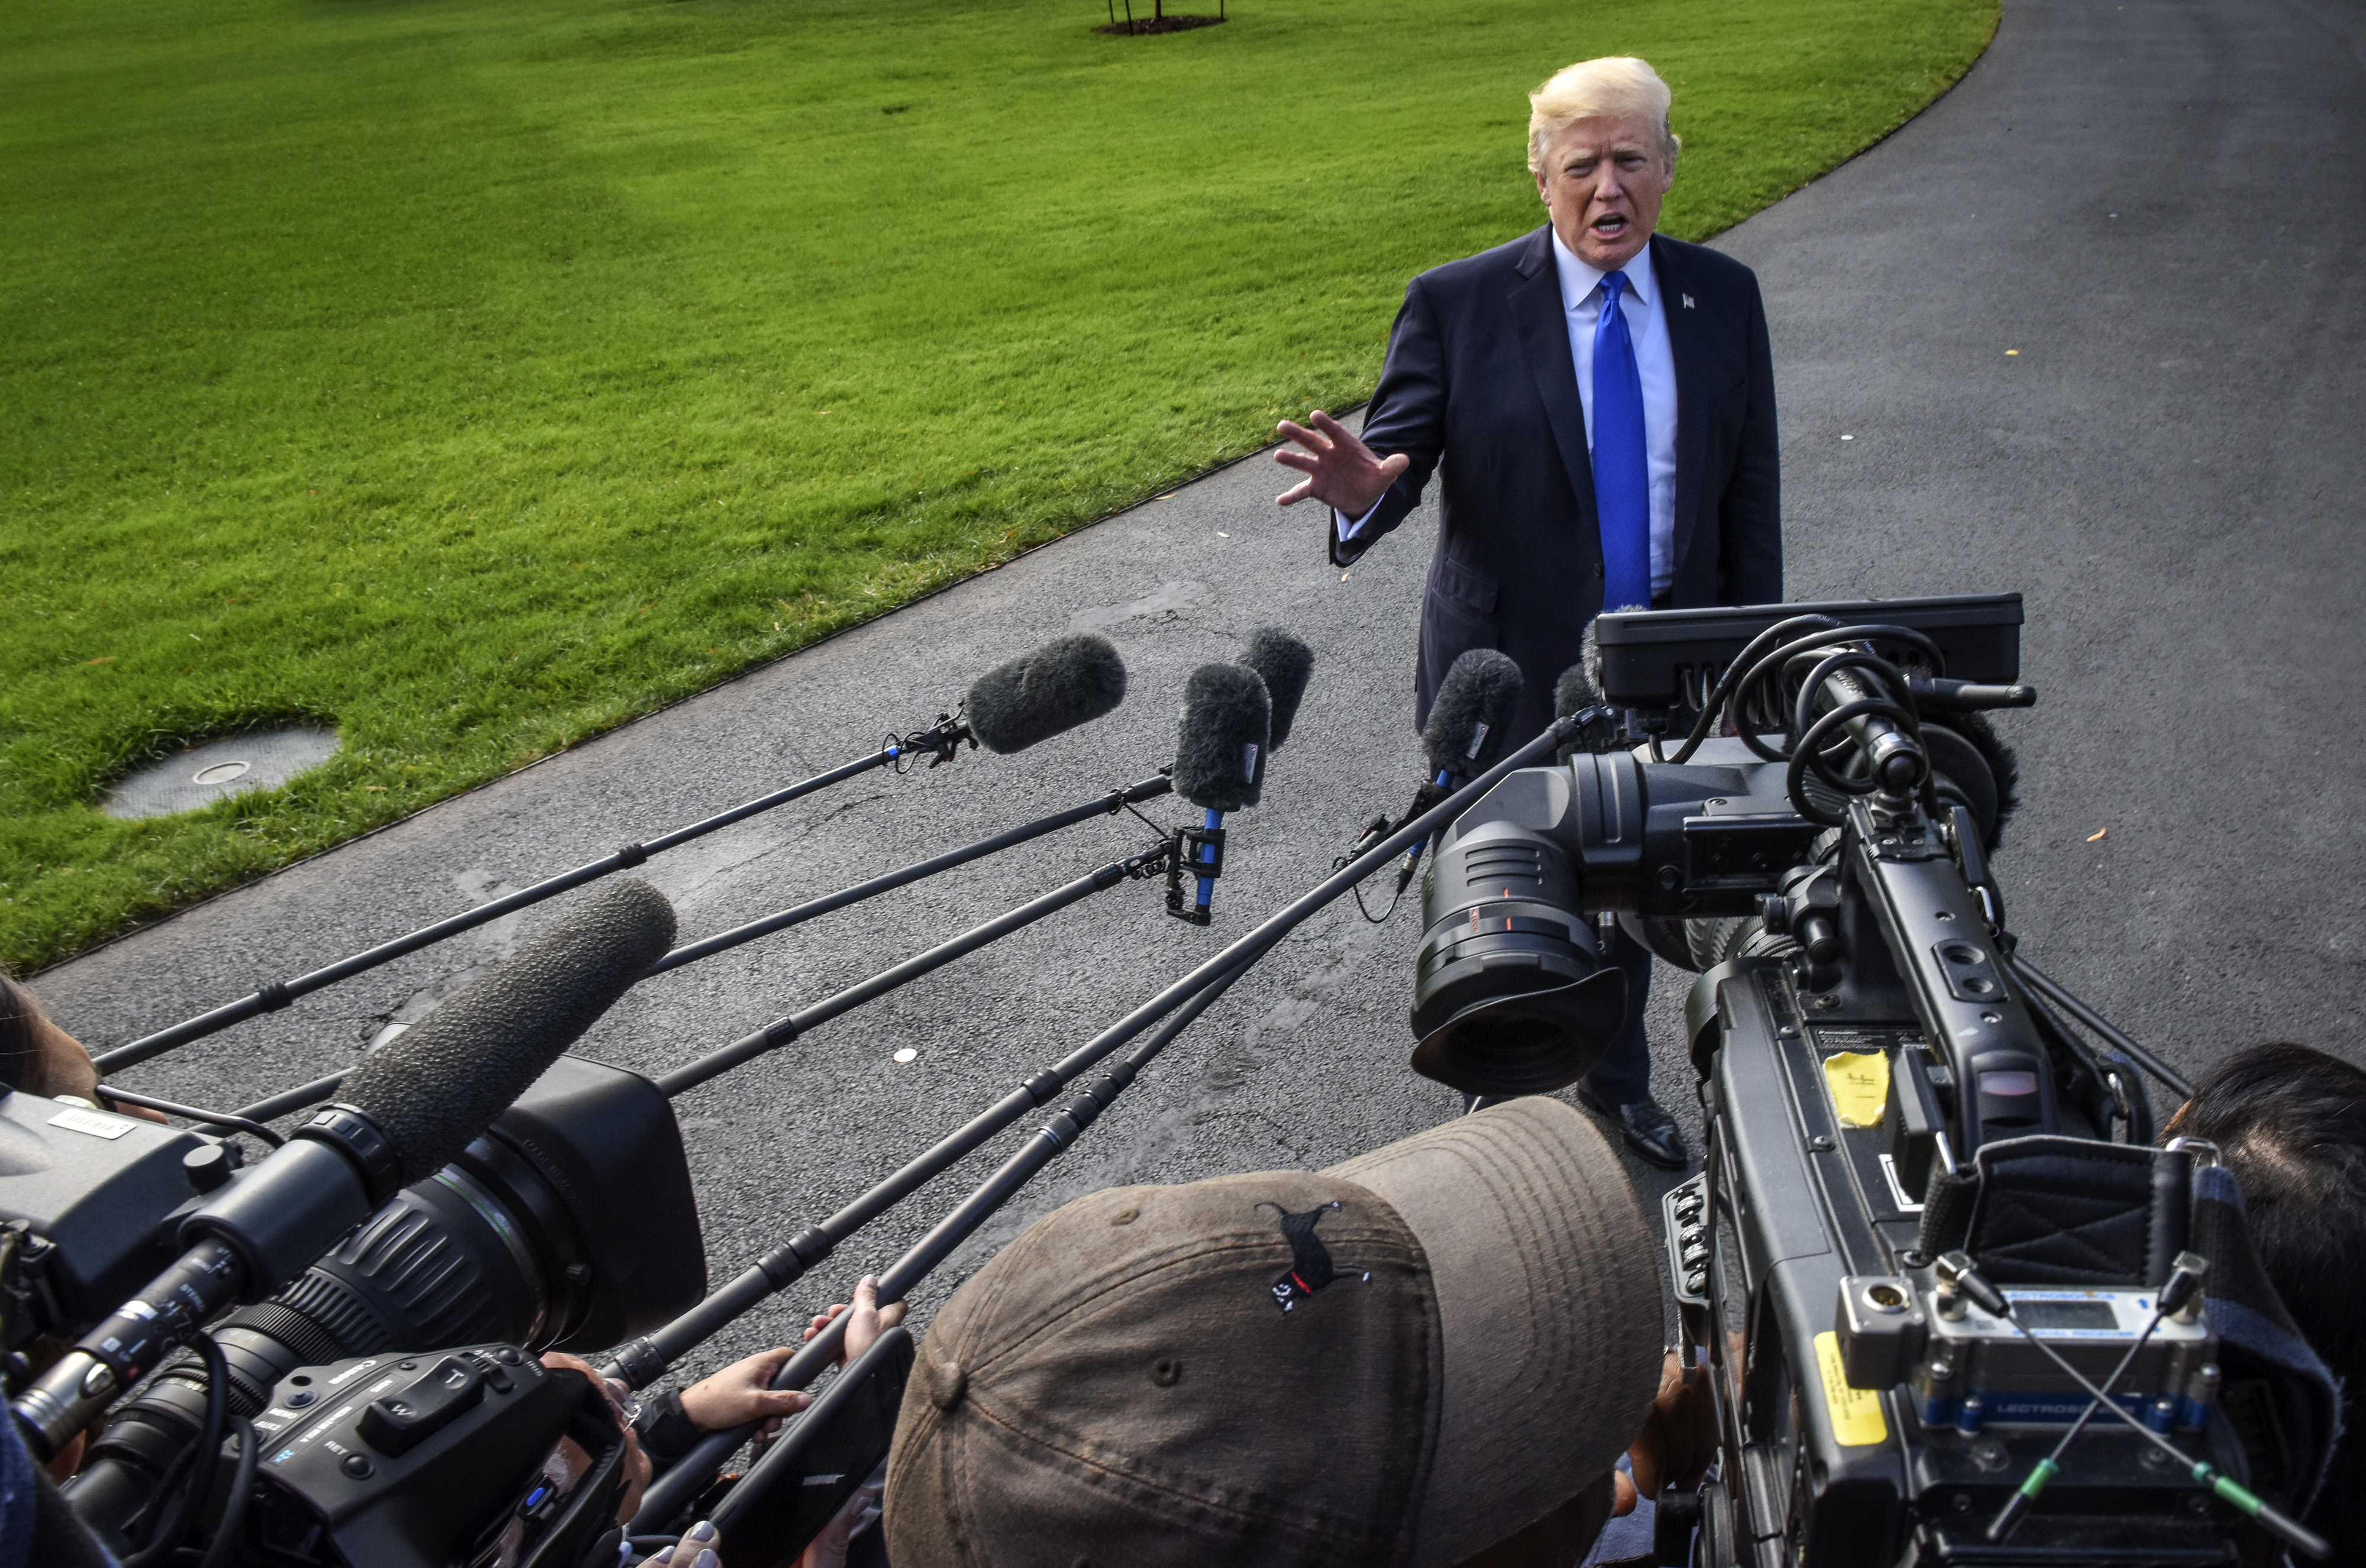 President Donald Trump takes questions from reporters on the way to Marine One before departing for Texas to attend a briefing on hurricane relief efforts on October, 25, 2017 in Washington, DC. (Photo by Bill O'Leary—The Washington Post/Getty)